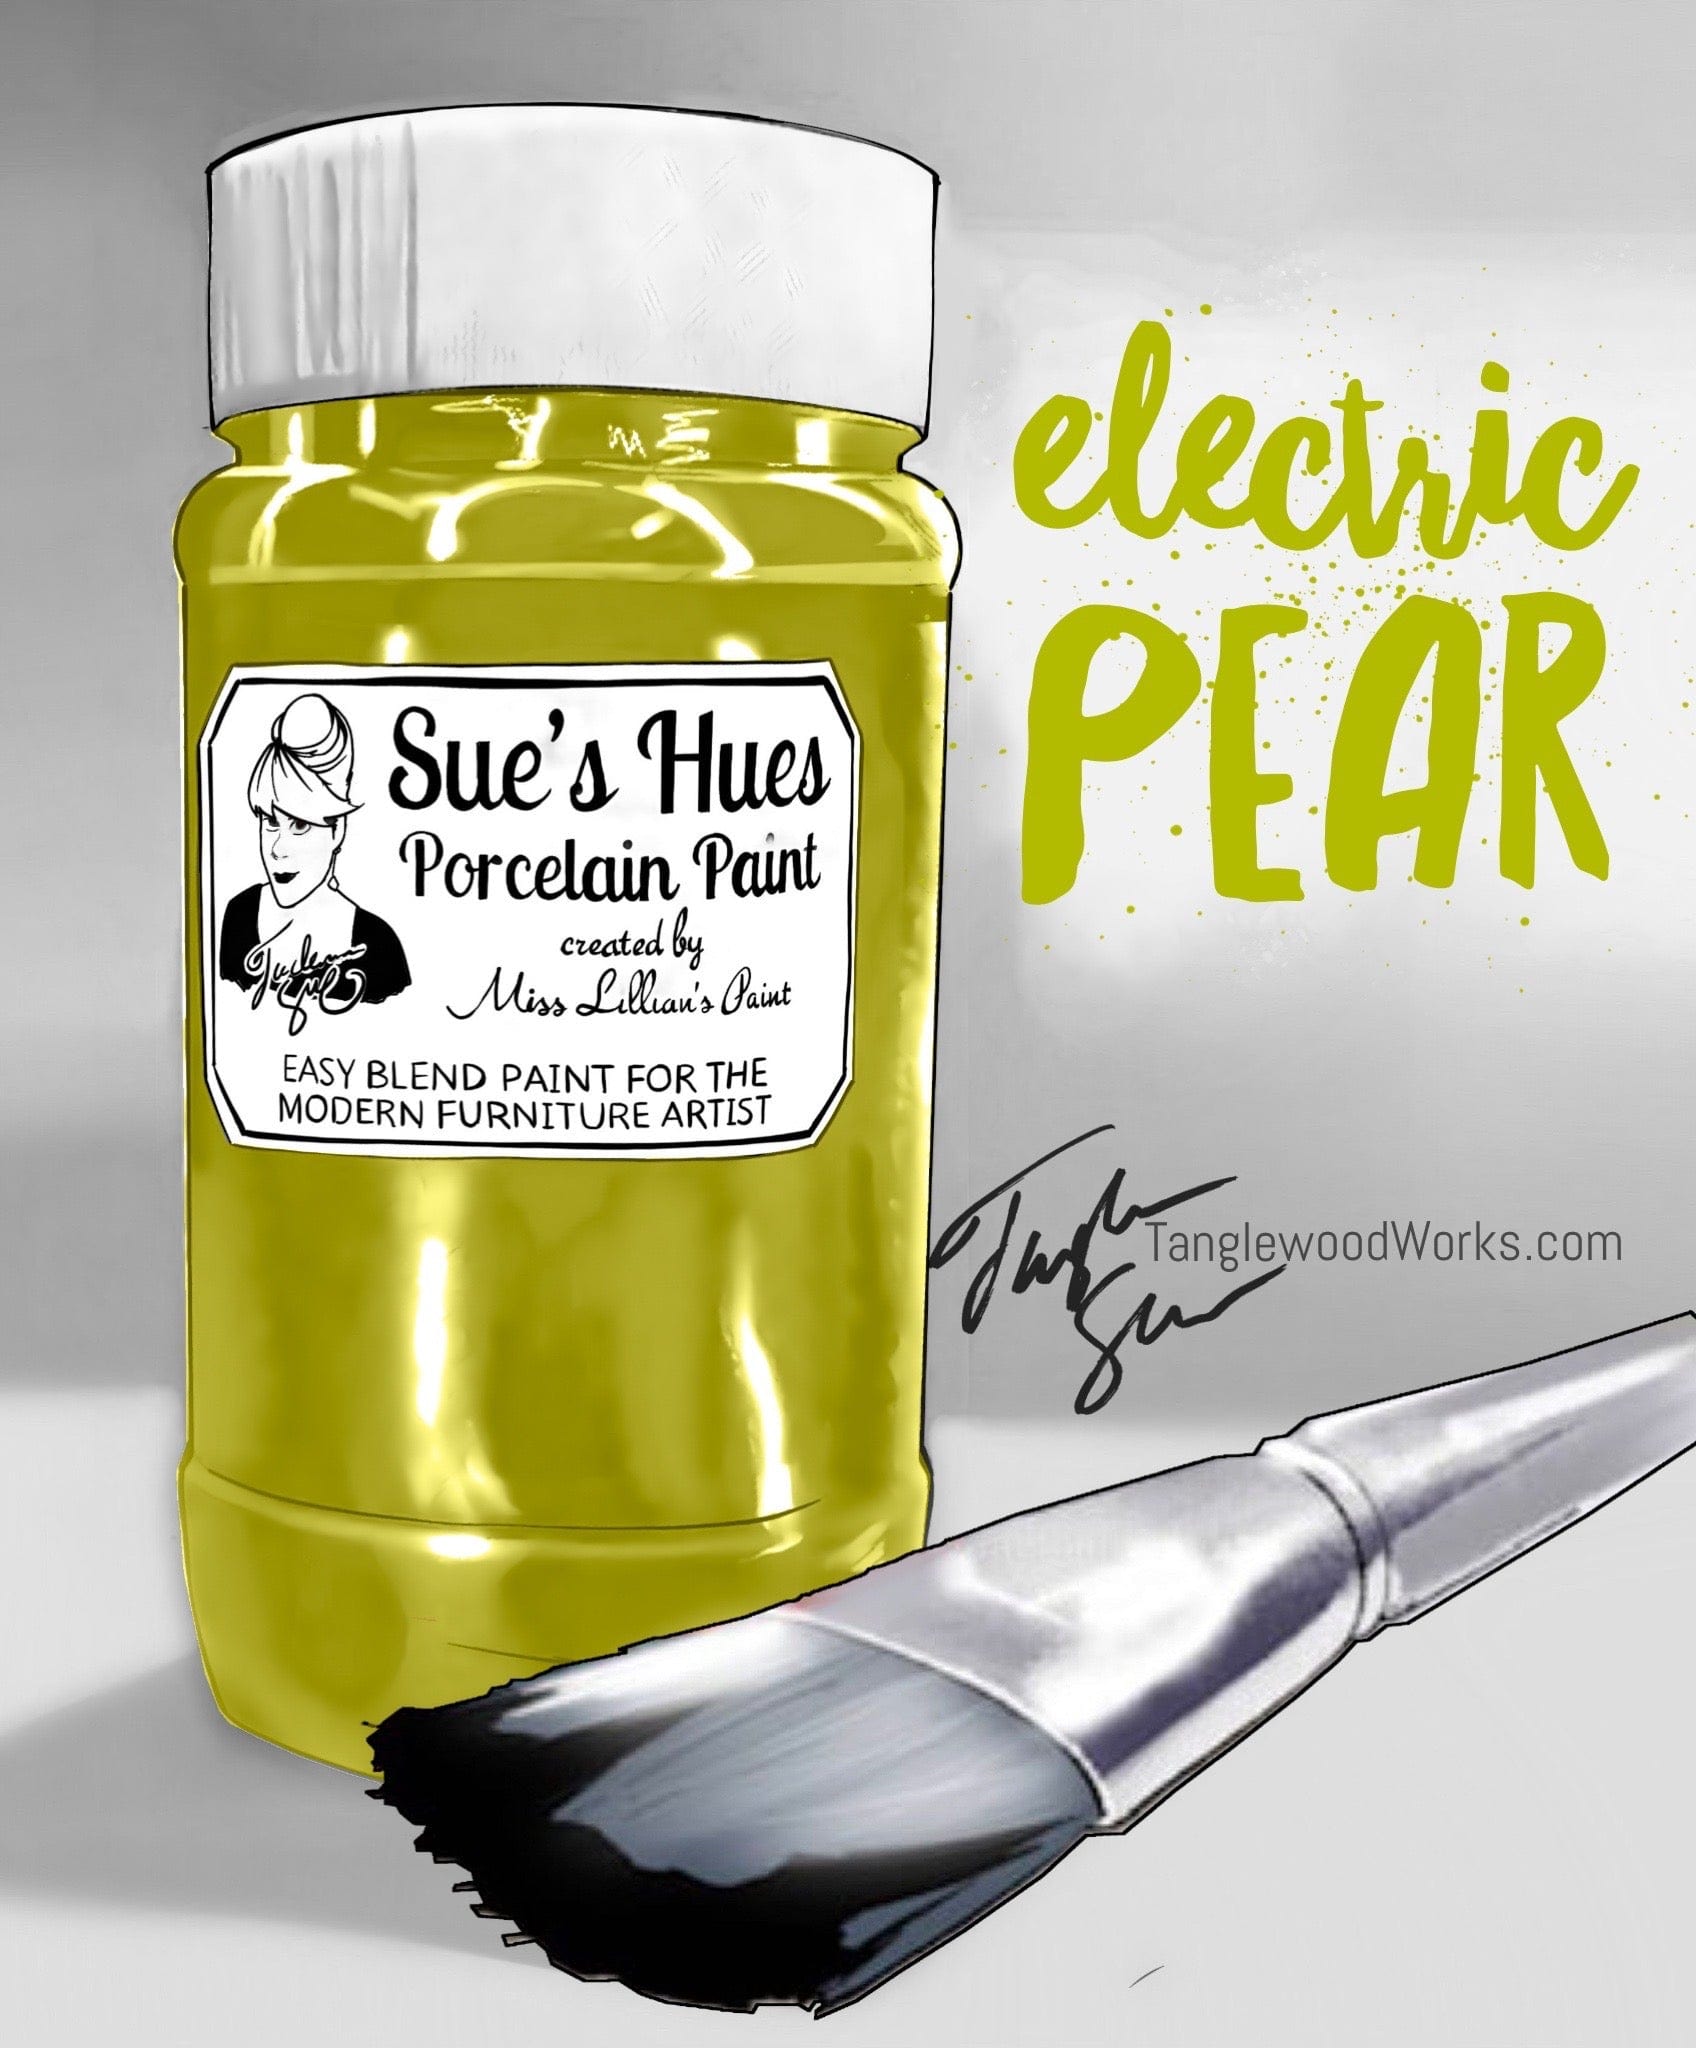 Tanglewood Works Craft Paint, Ink & Glaze 8 Oz Sample Sue's Hues Porcelain Paint: Electric Pear